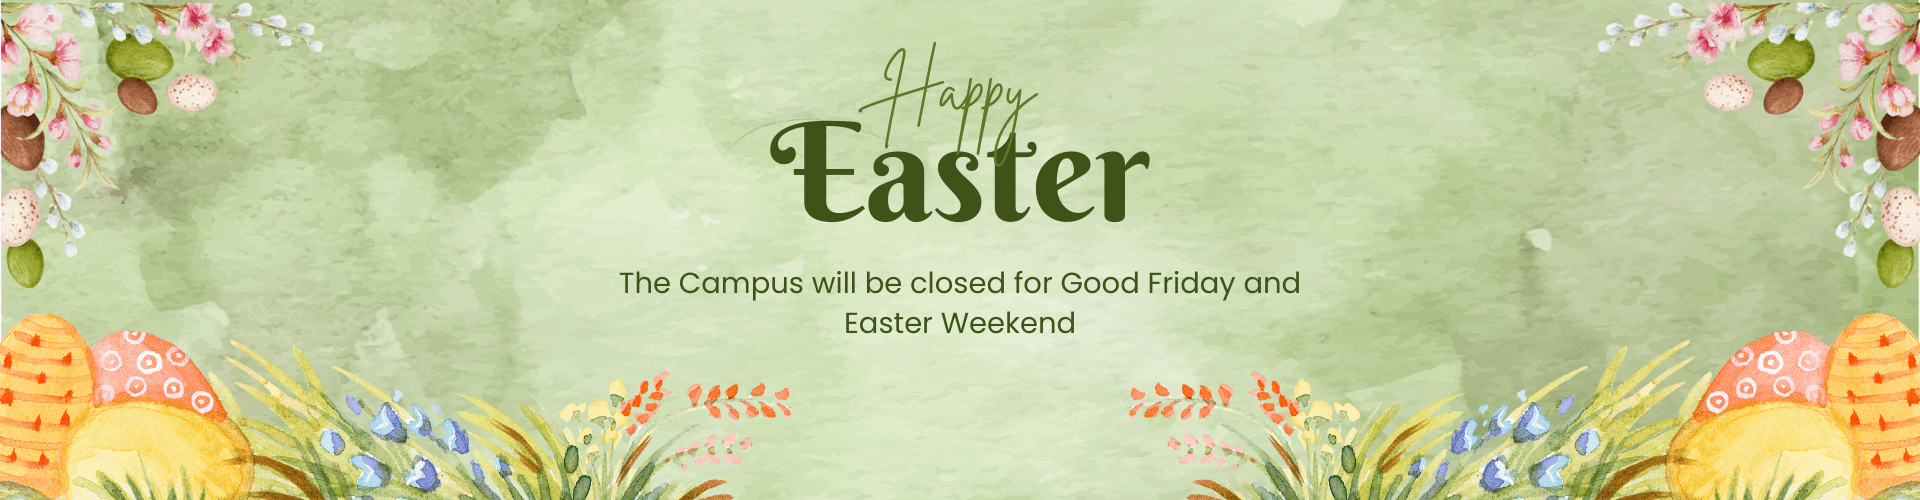 Campus Closed for Good Friday and Easter Sunday